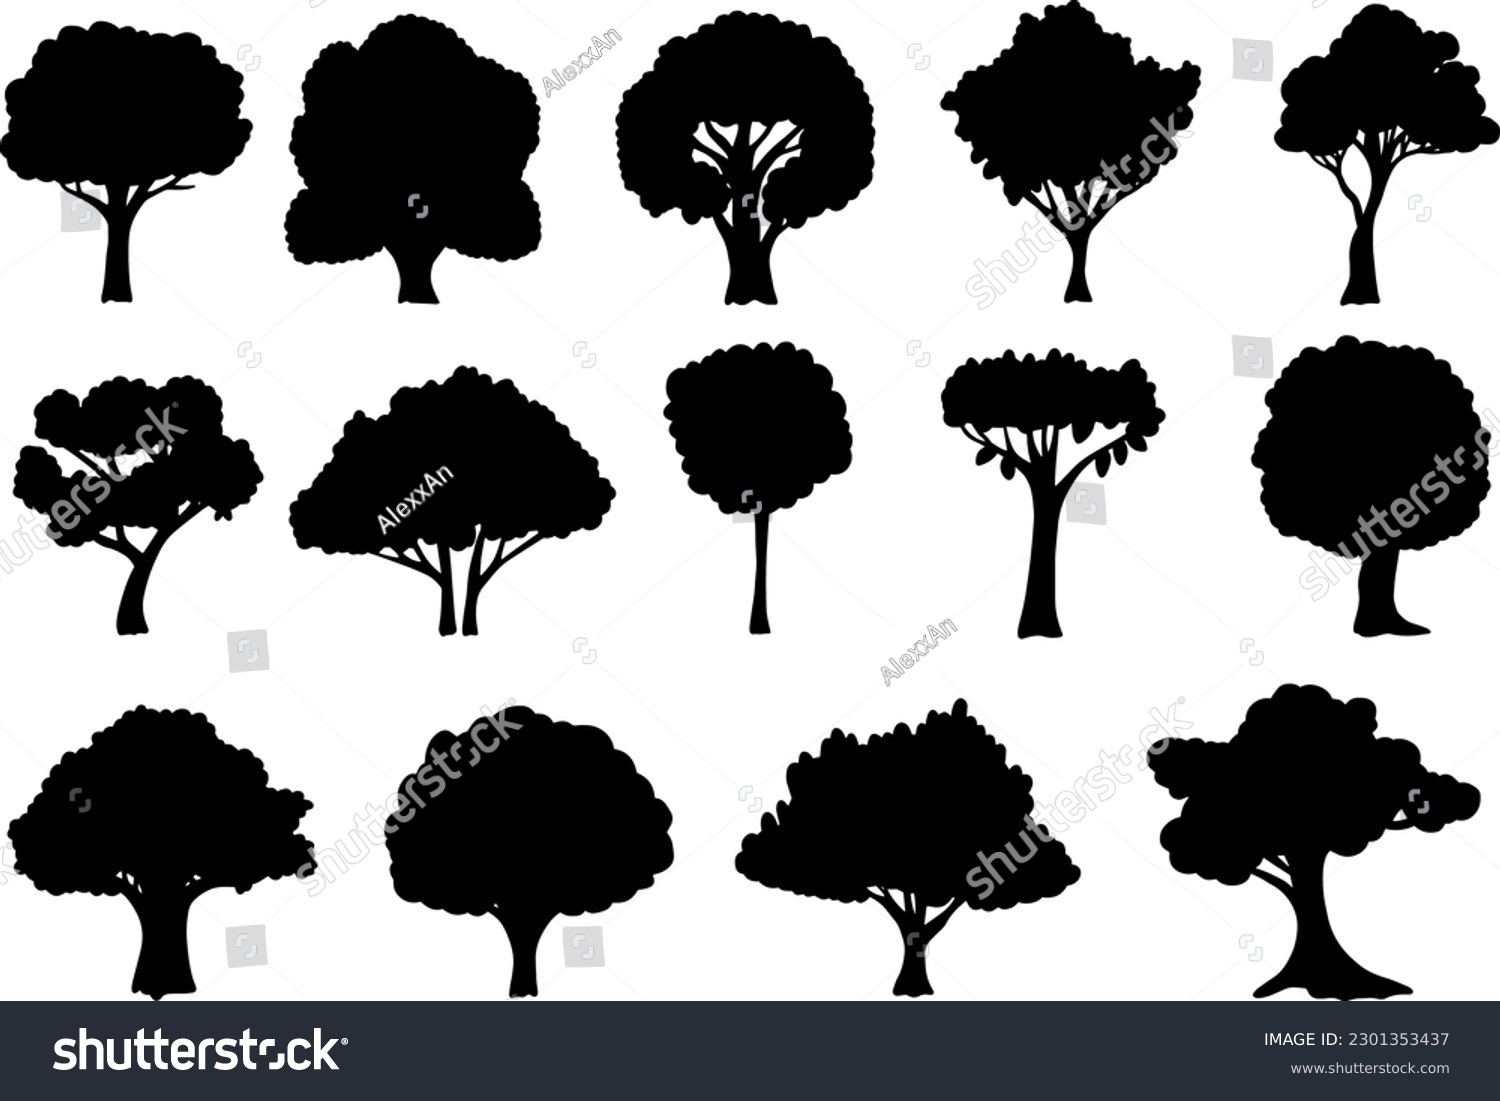 SVG of Tree silhouettes collection on white background svg